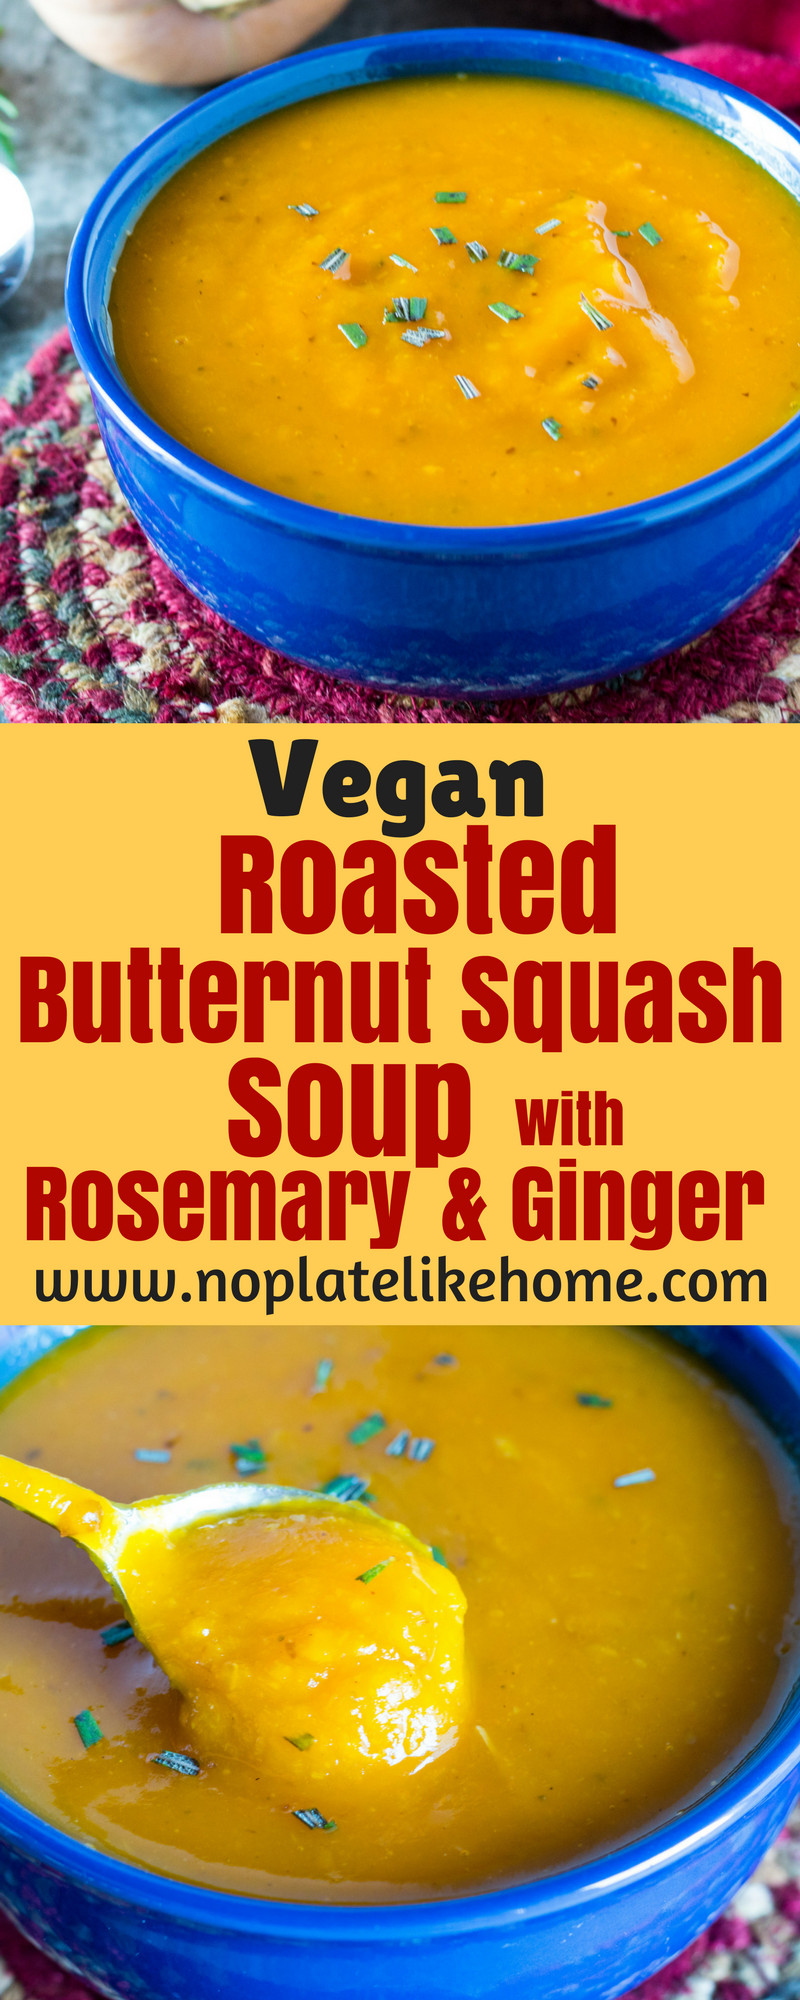 Butternut Squash Soup Vegan
 Easy Roasted Butternut Squash Soup with Rosemary and